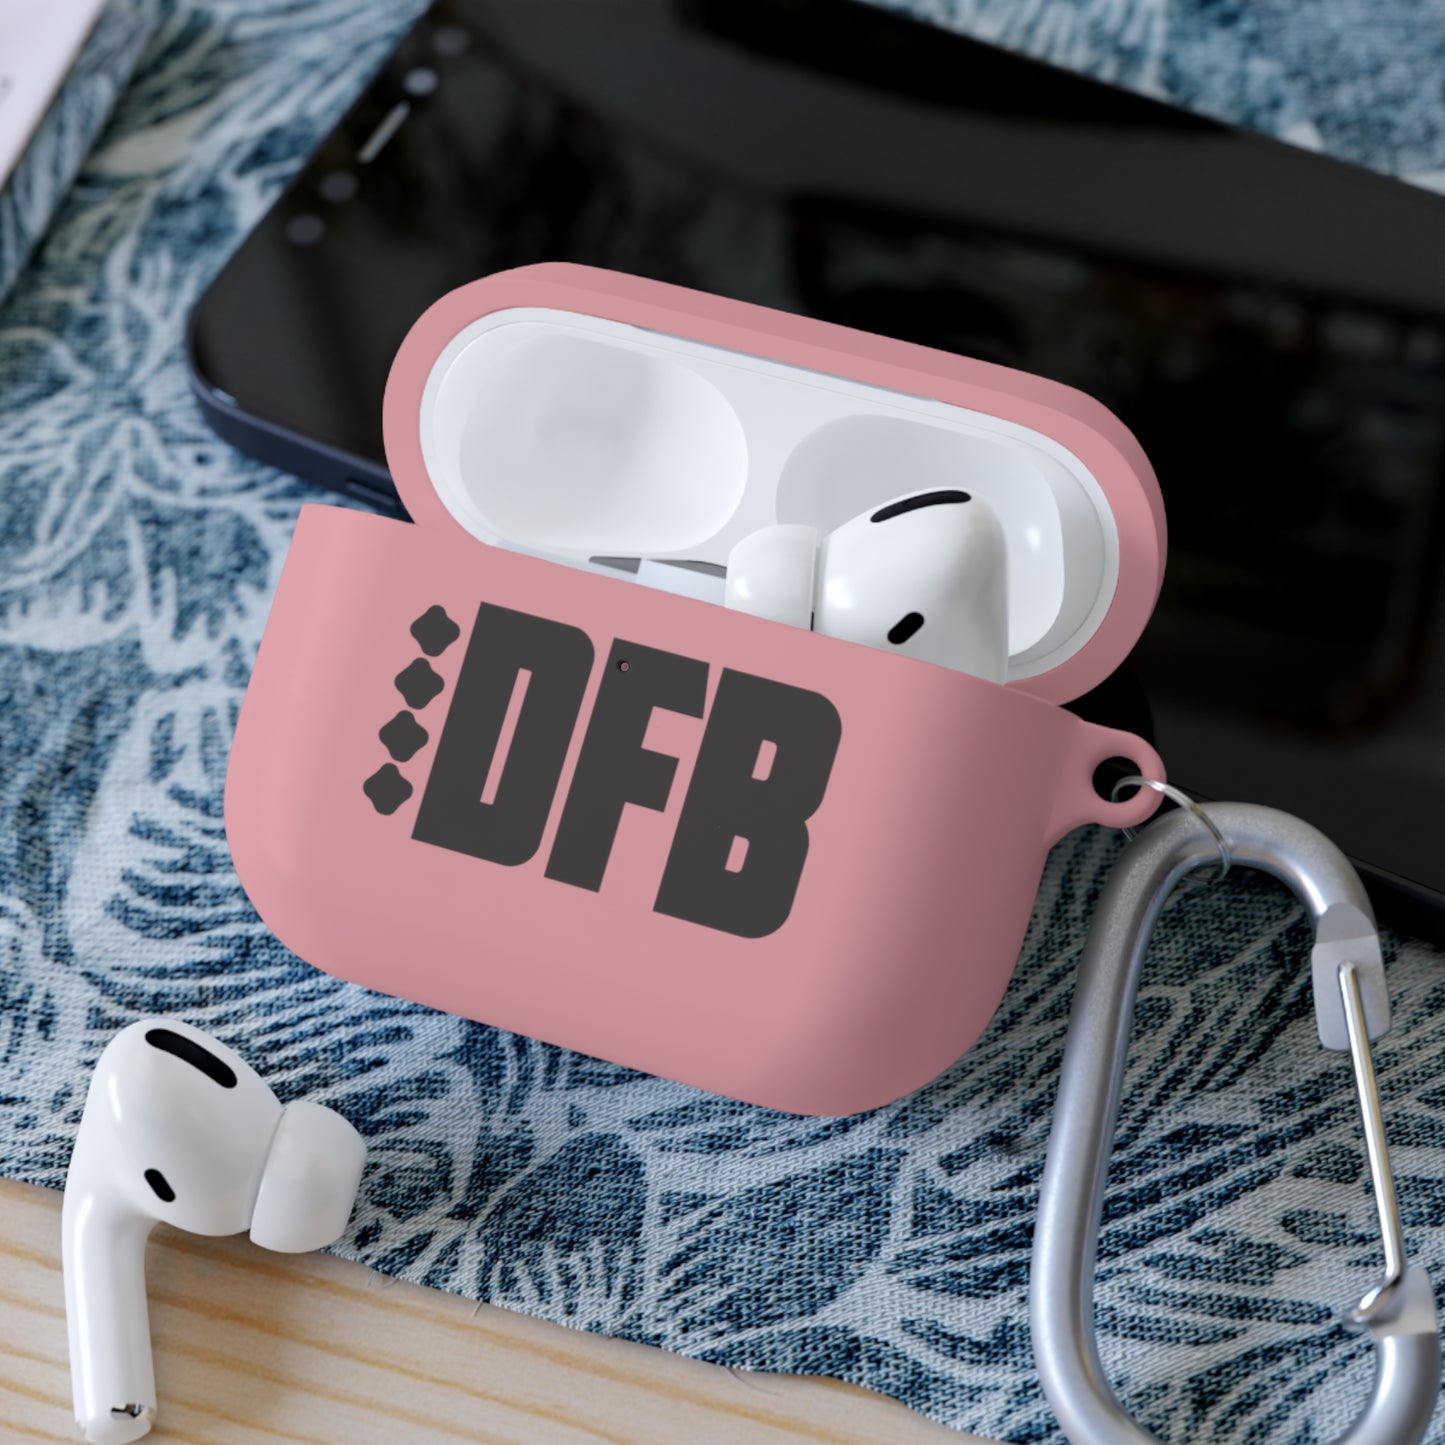 DFB AIRPODS/AIRPODS PRO CASE COVER